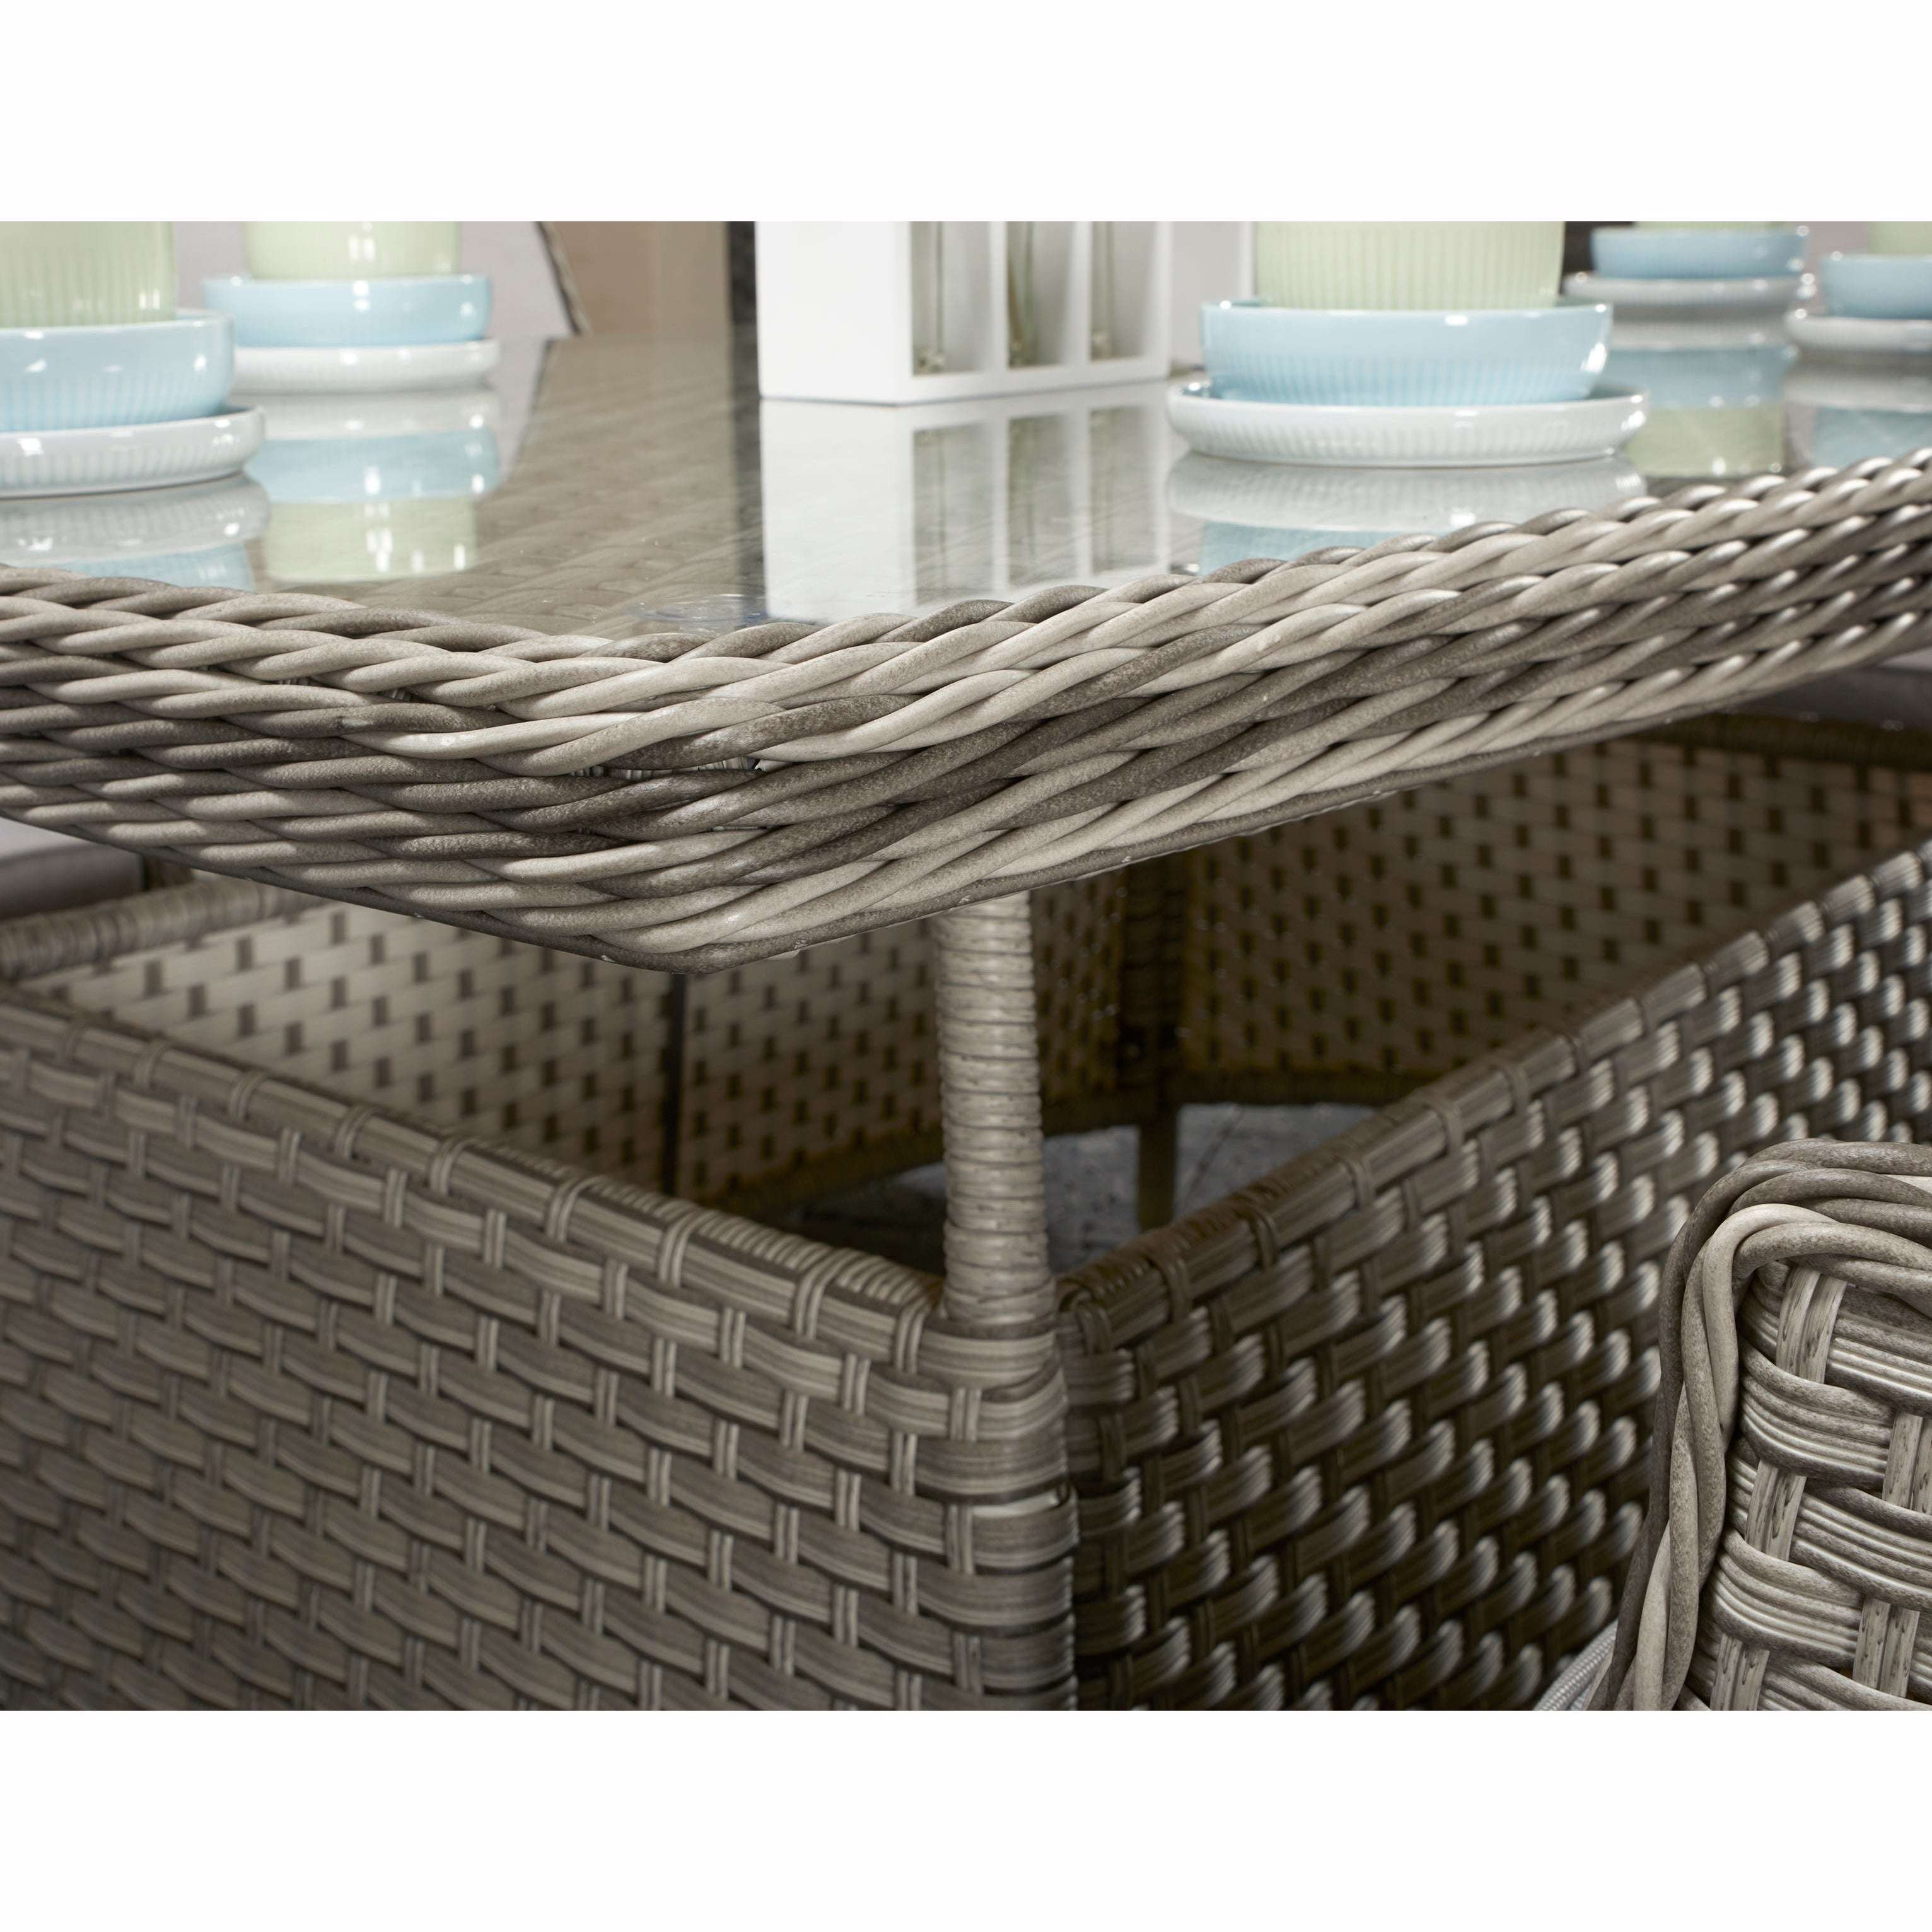 Exceptional Garden:Signature Weave Edwina Dining Set - 3 Wicker Special Grey